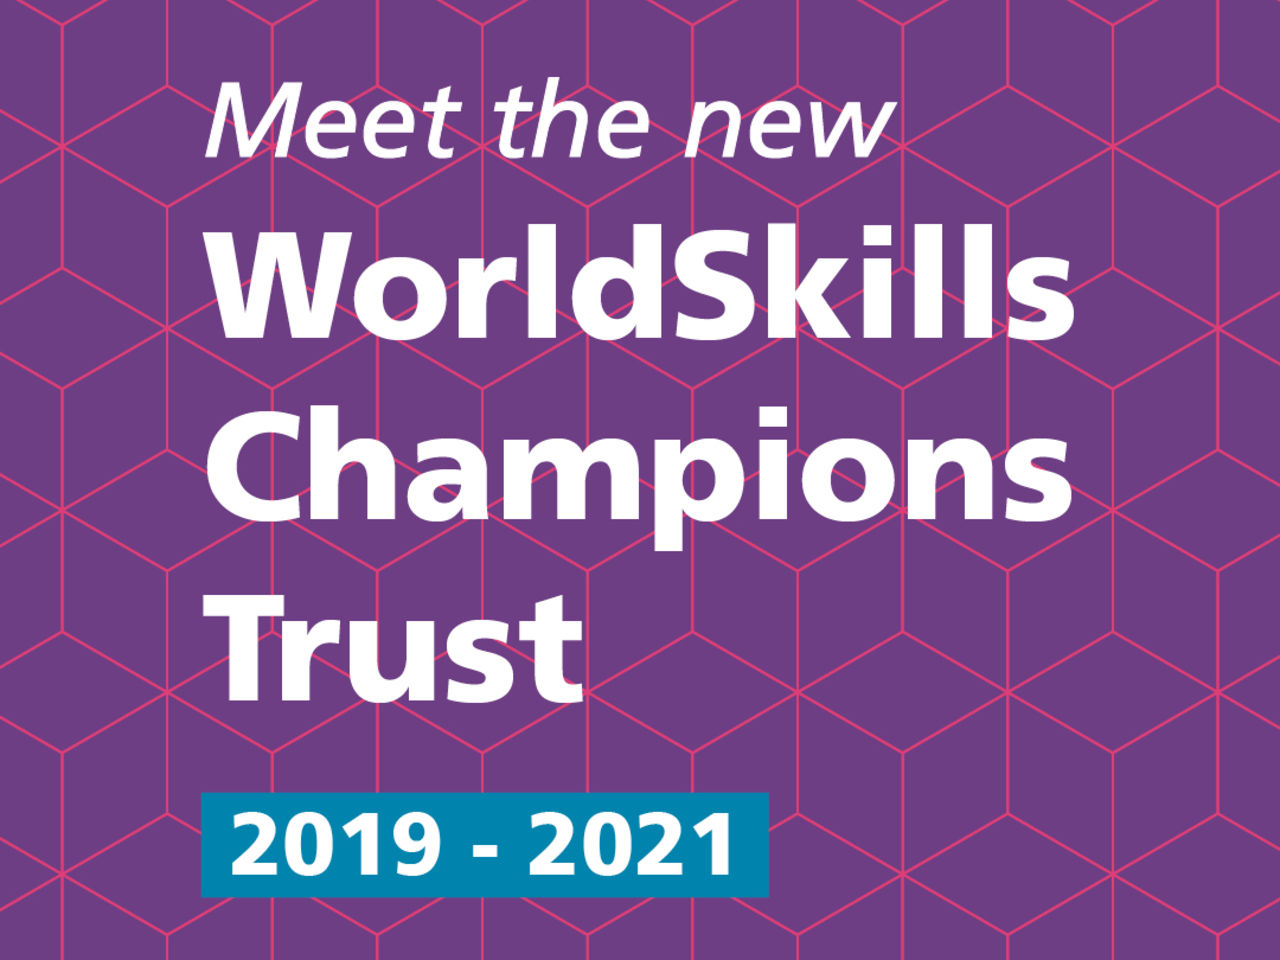 Welcome to the new Champions Trust!